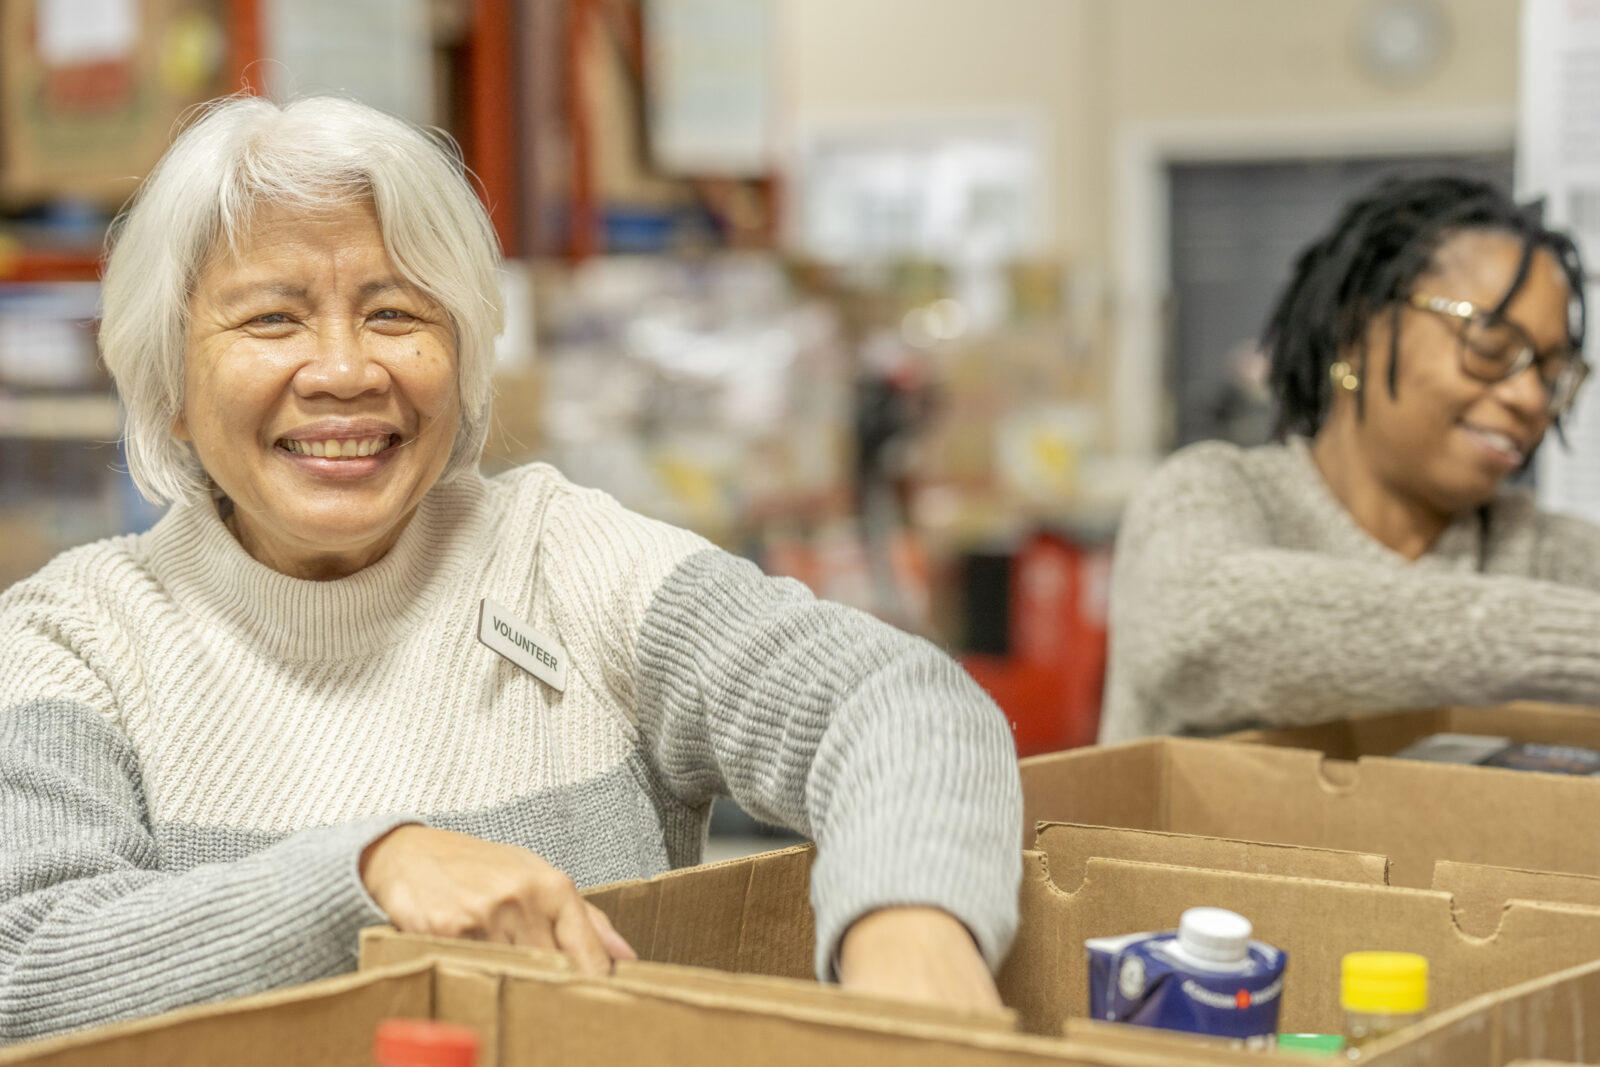 Two senior ladies work together as they volunteer their time at a local Food Bank.